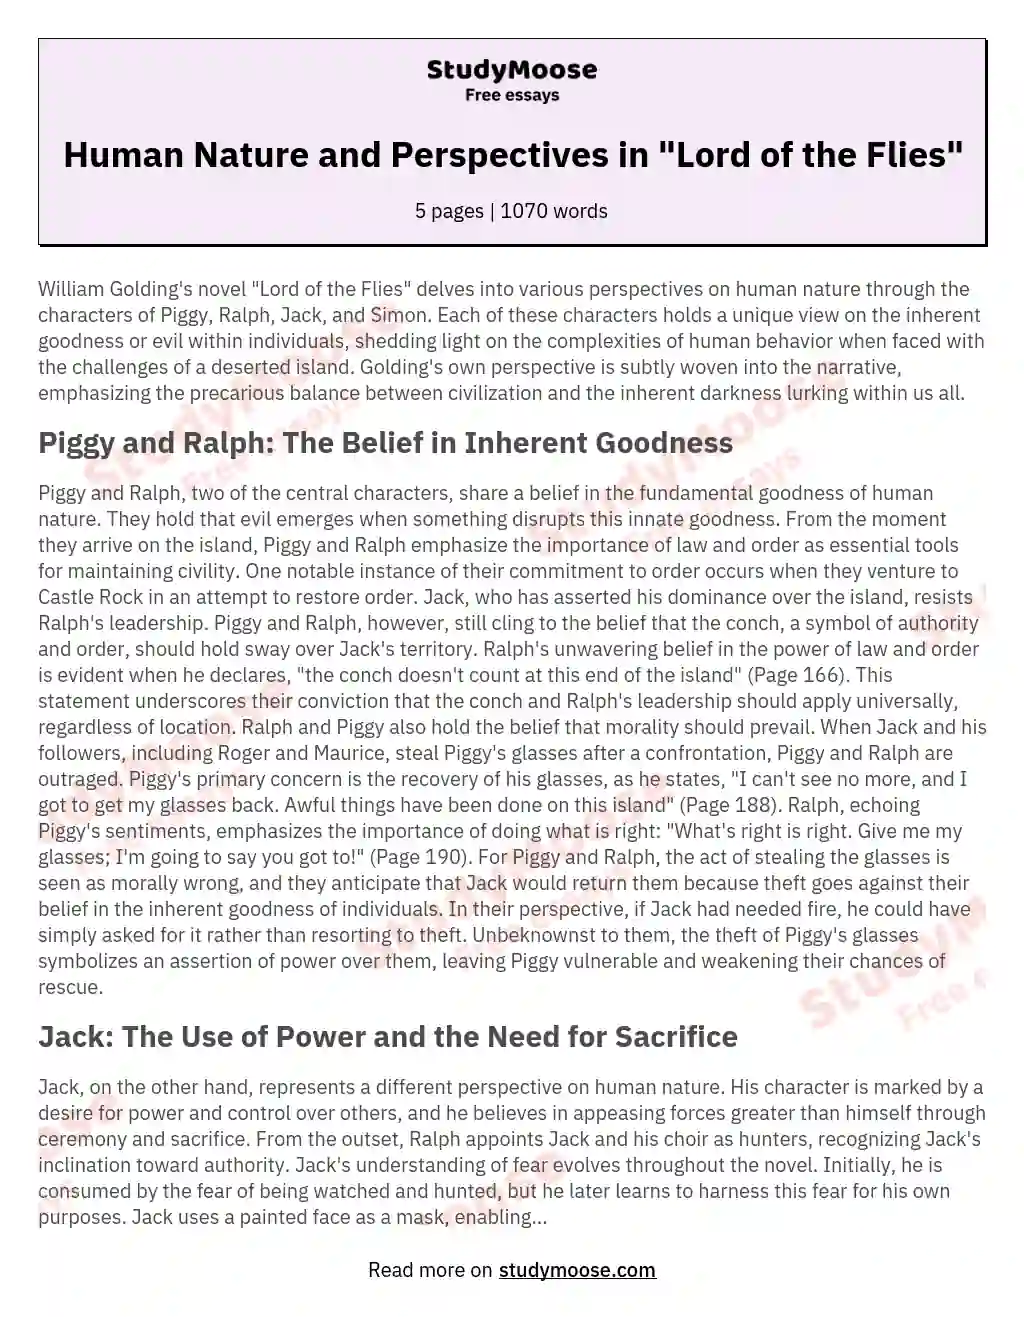 Human Nature and Perspectives in "Lord of the Flies" essay